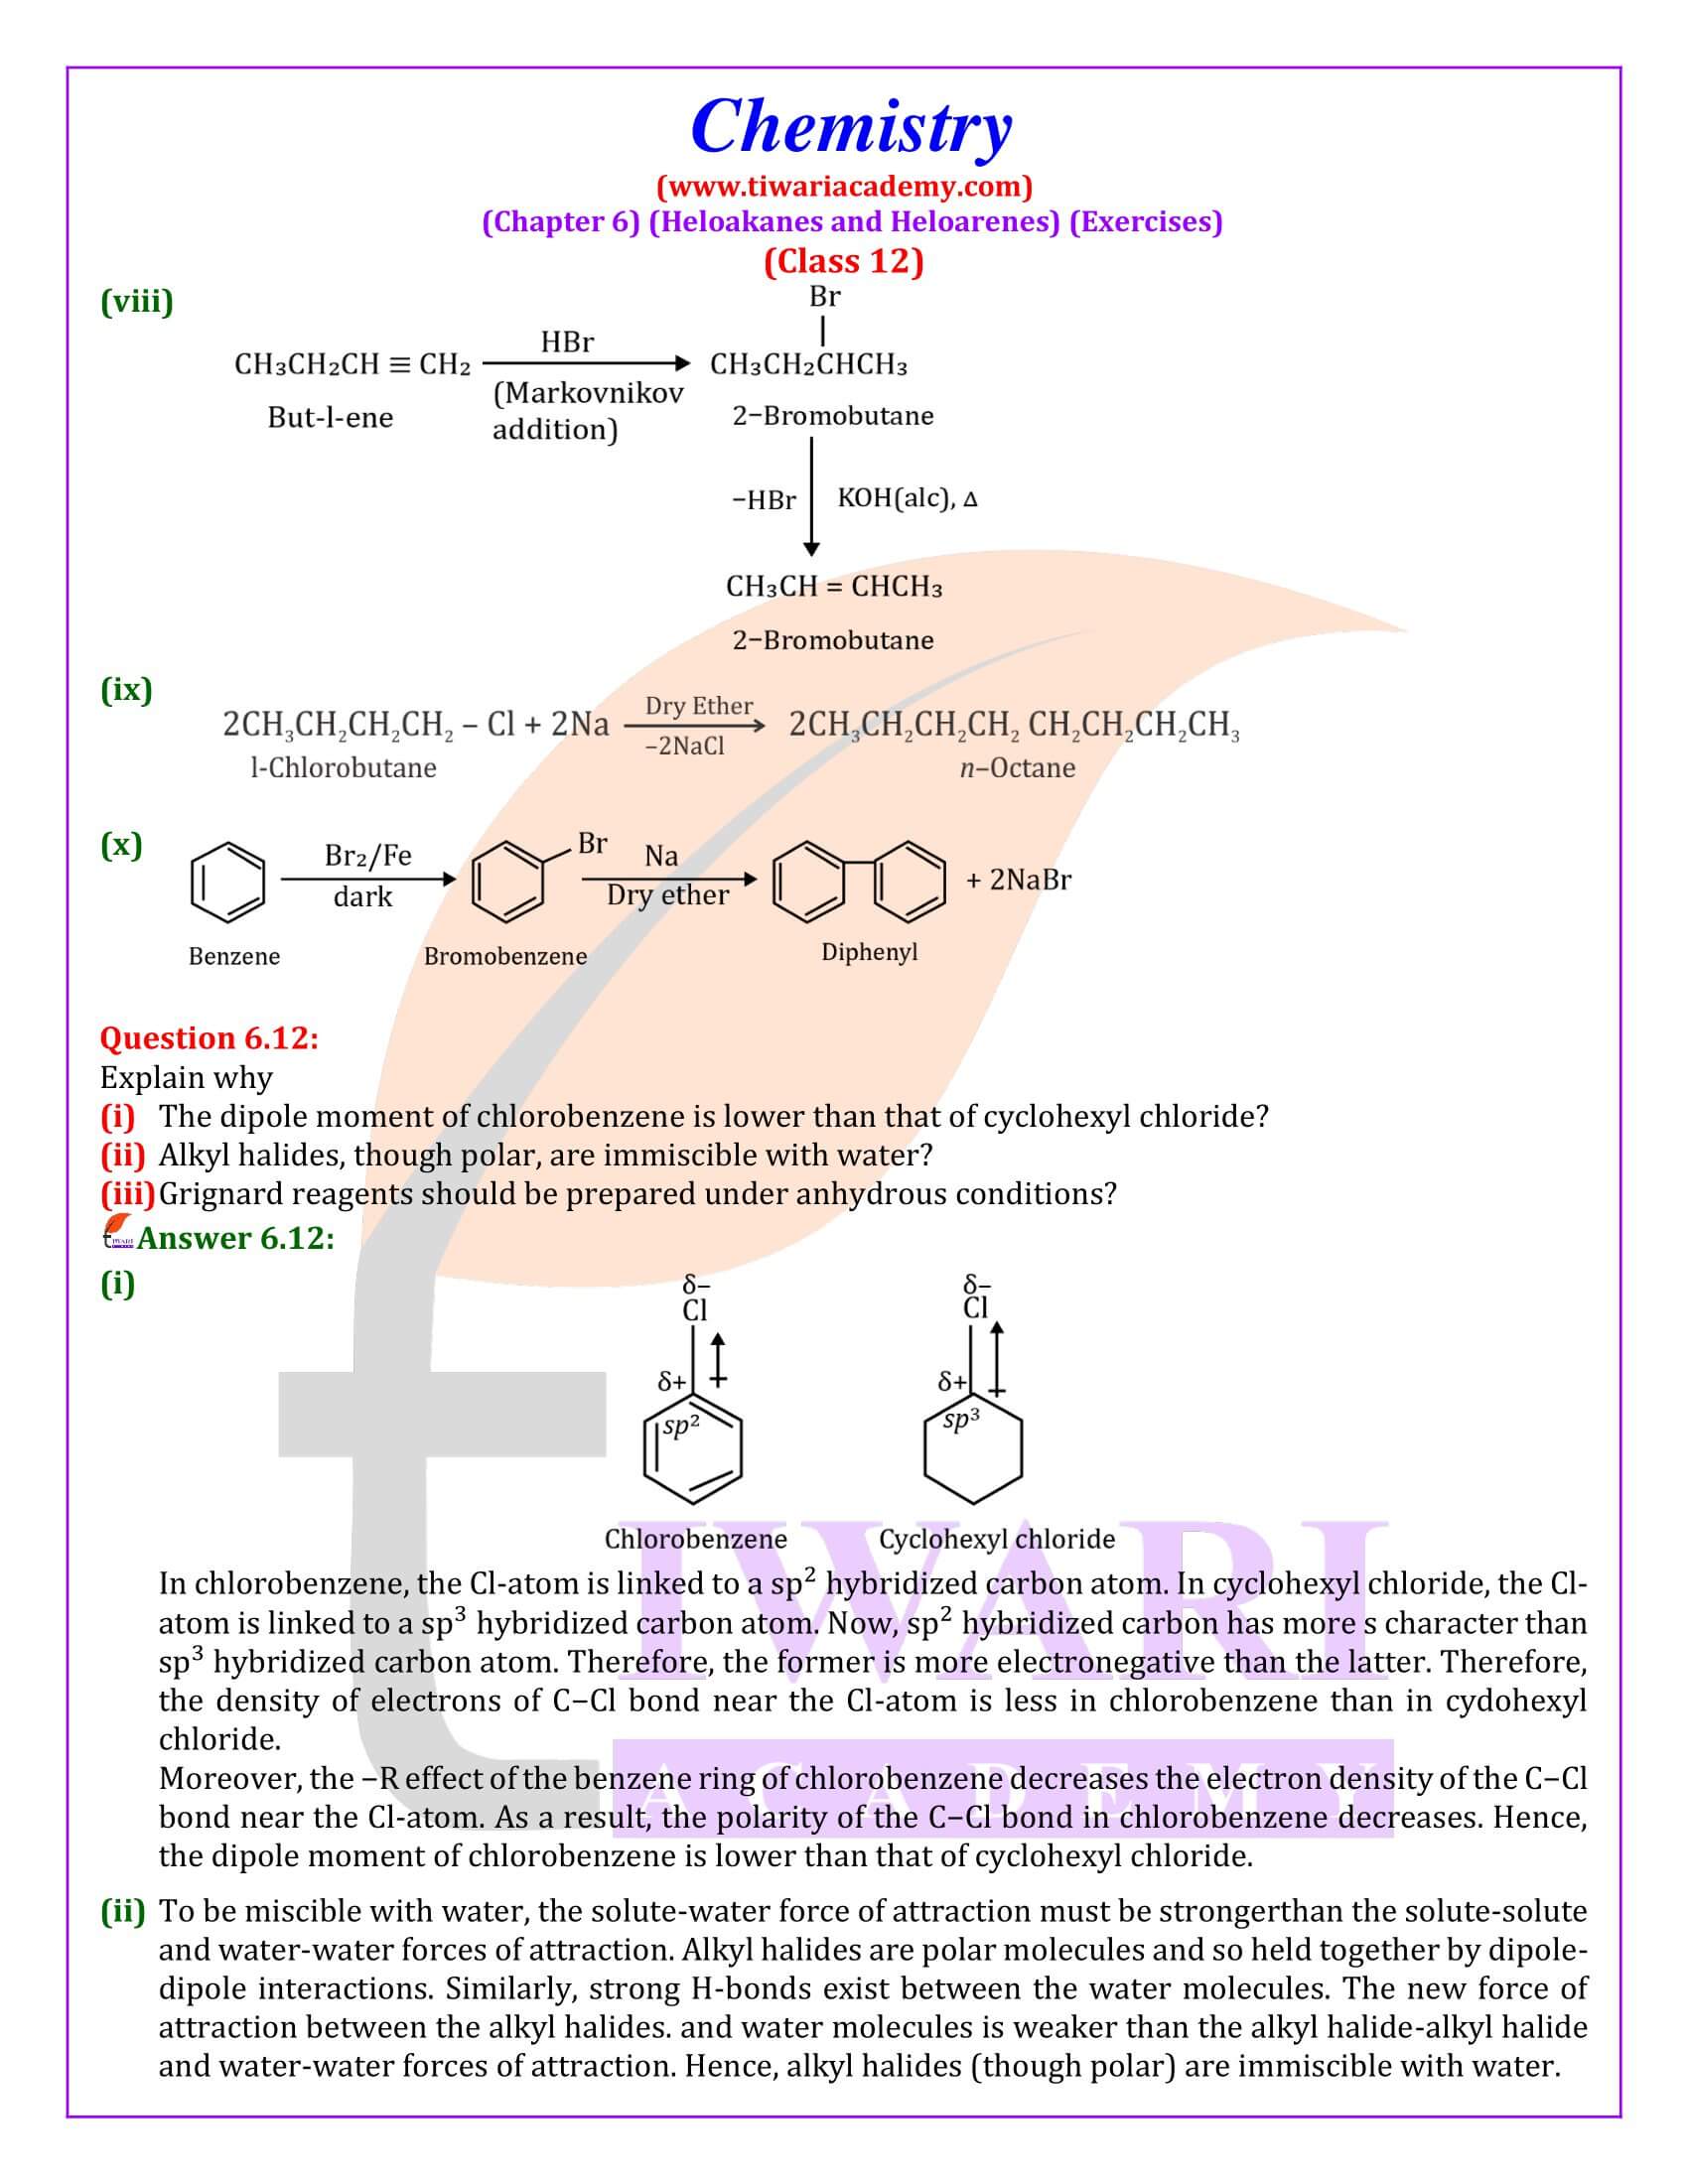 NCERT Class 12 Chemistry Chapter 6 Answers